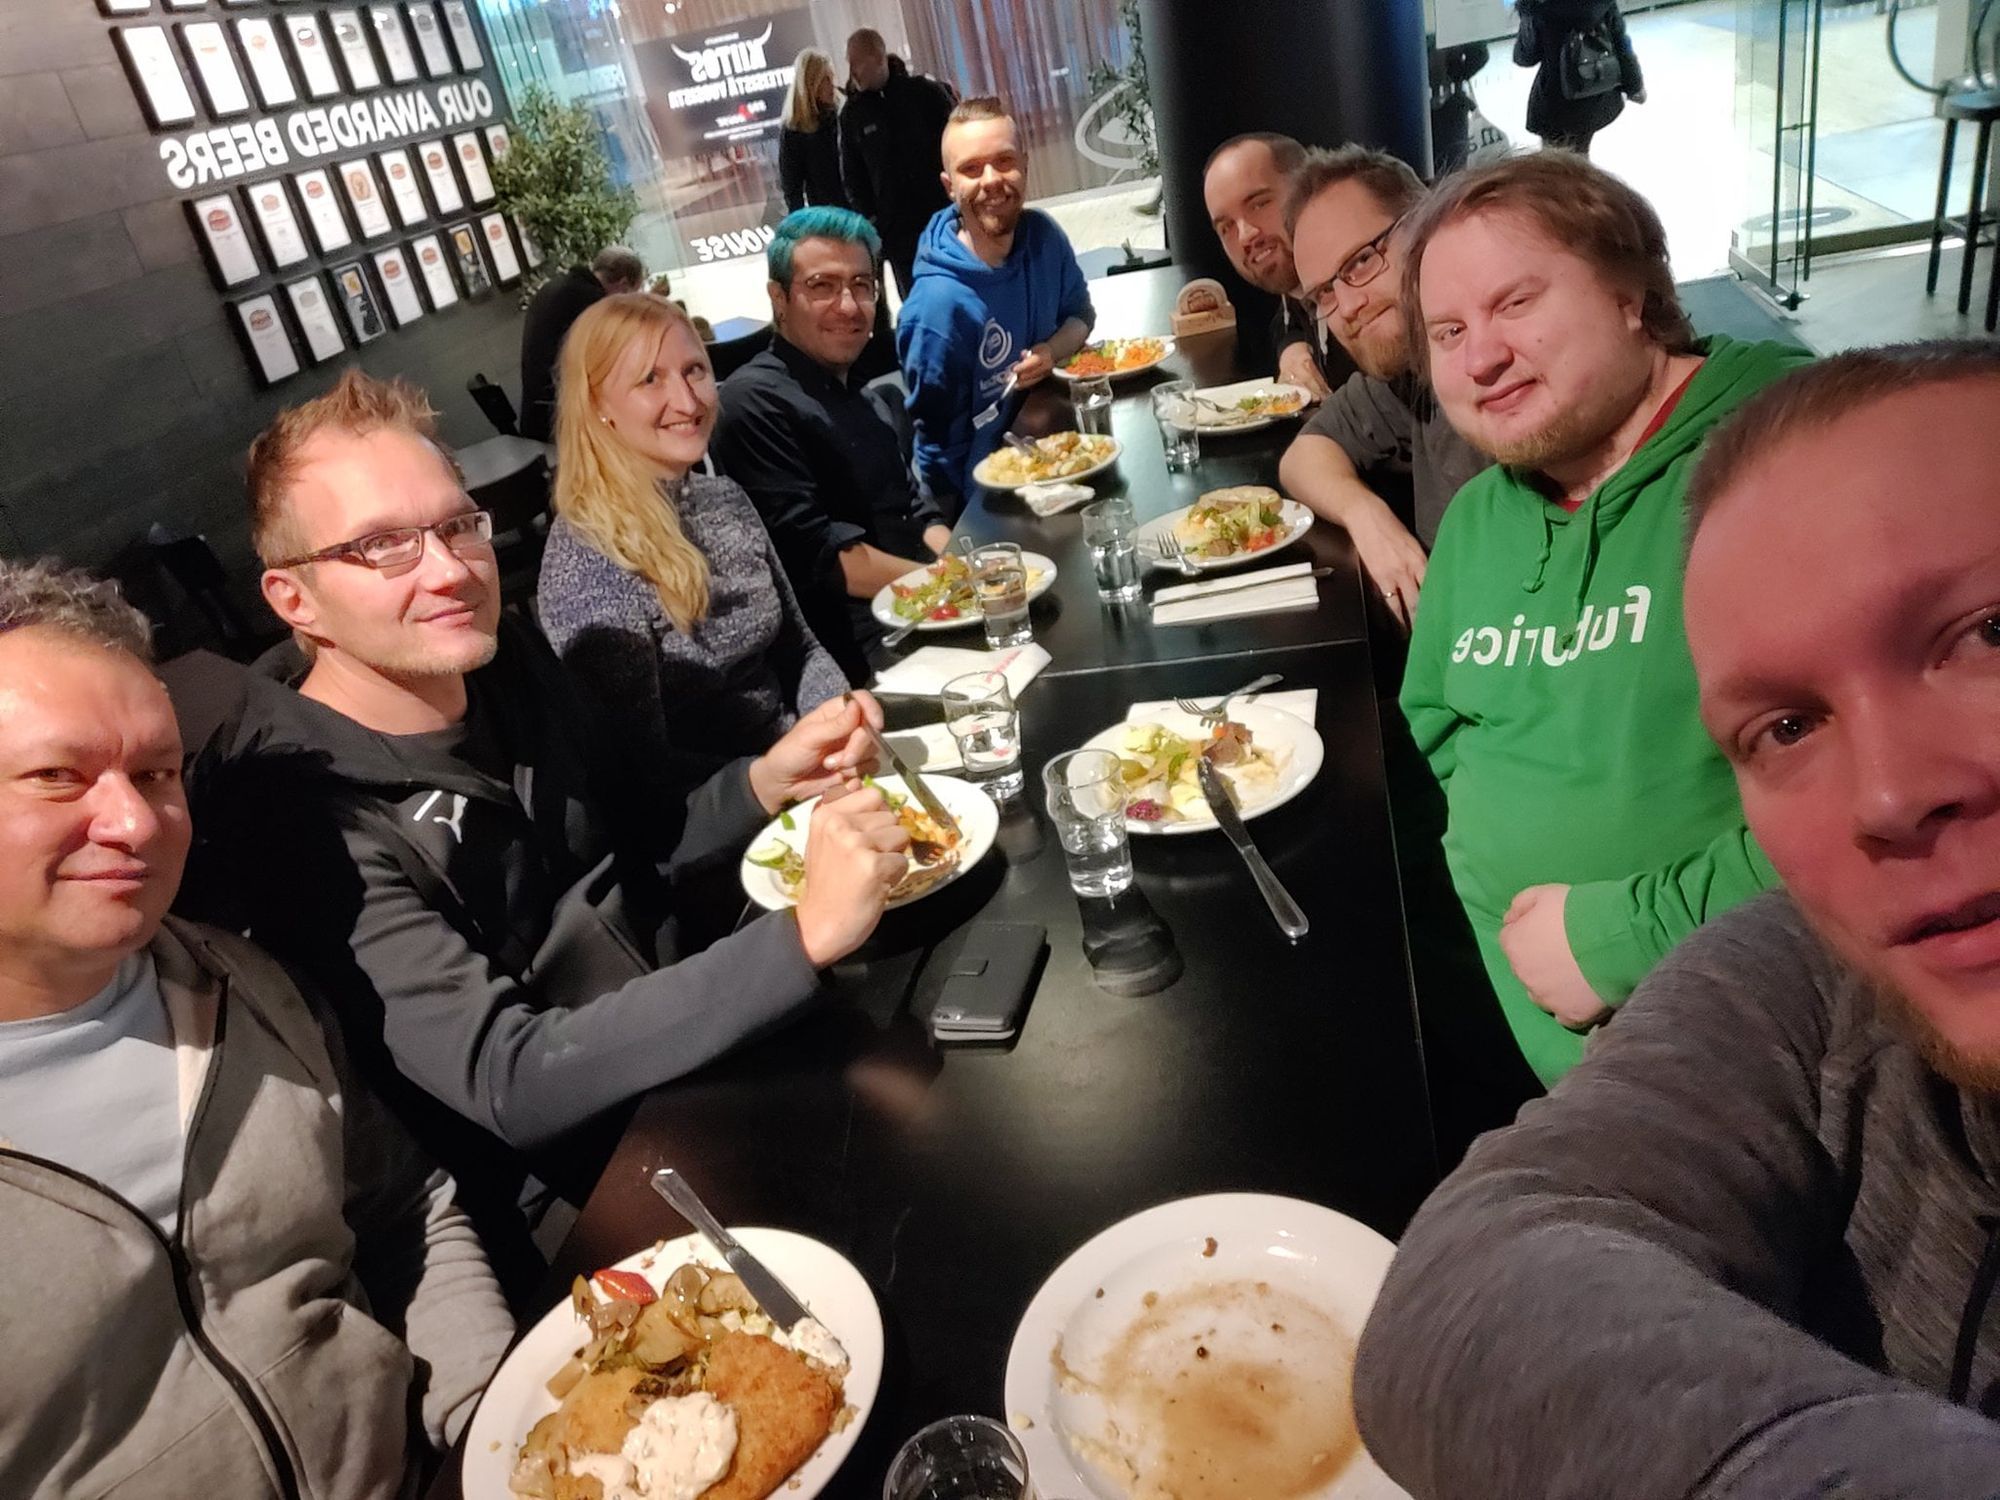 A group of developers eating lunch around a long table